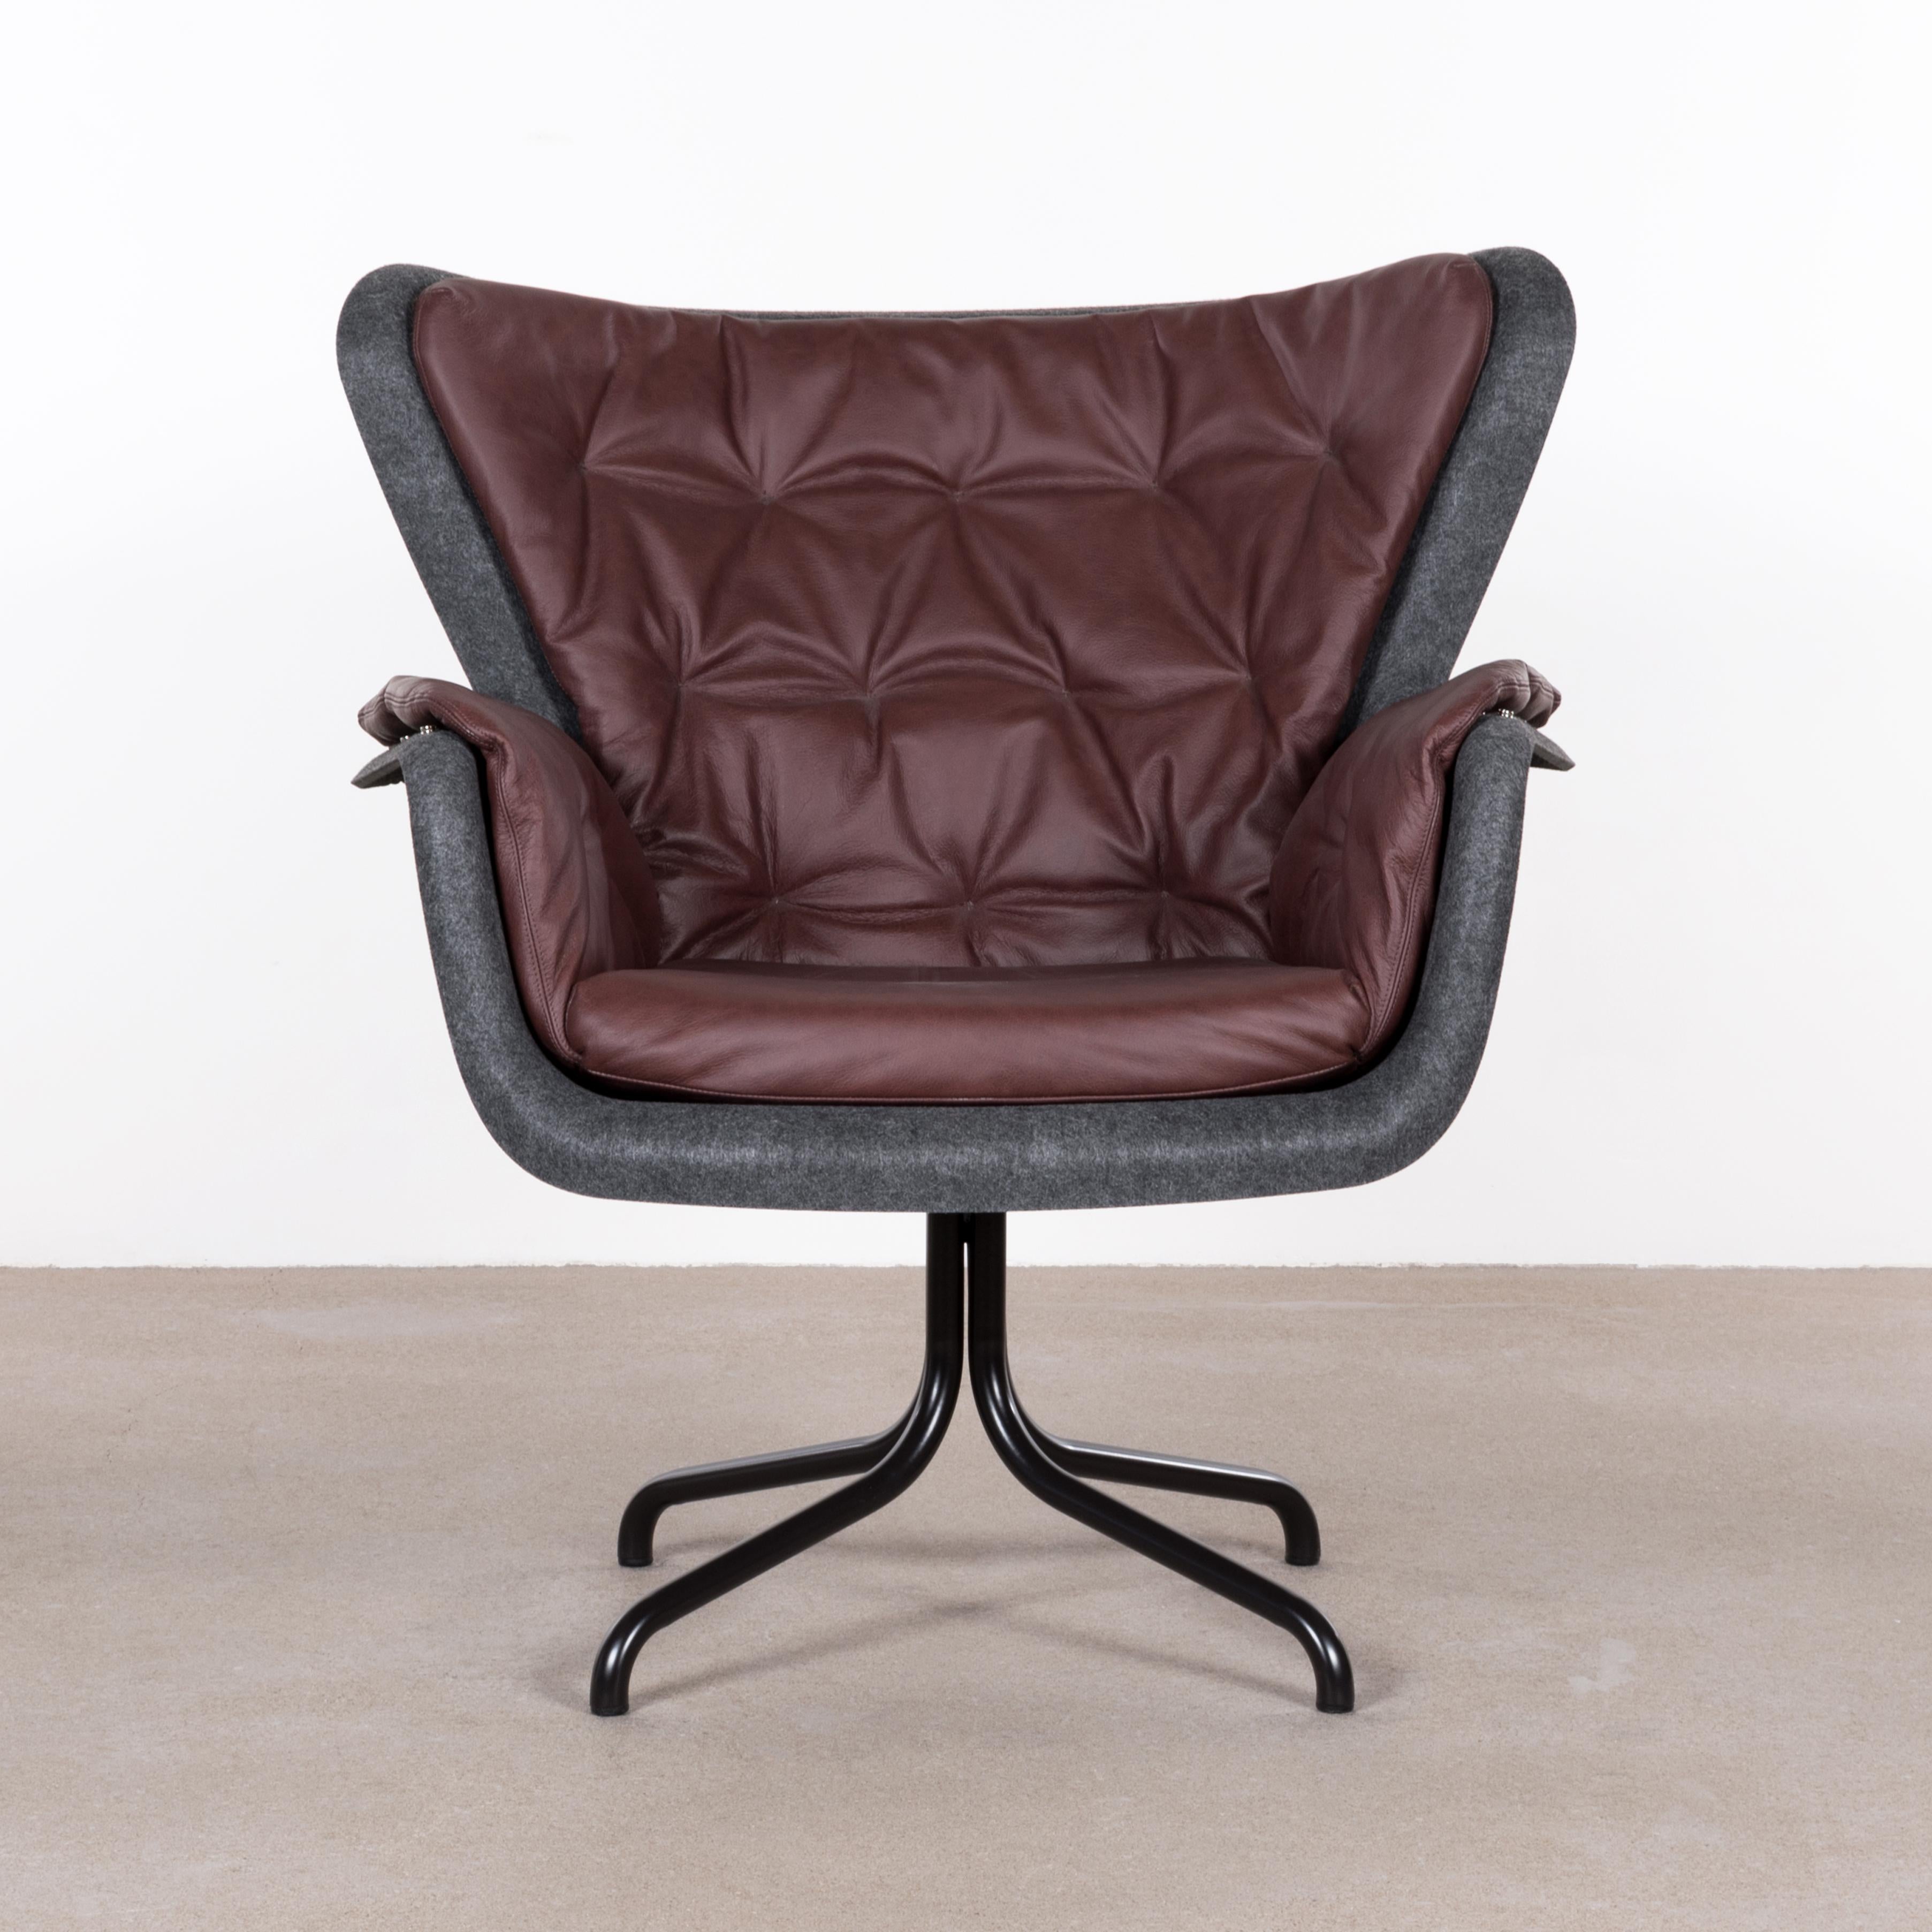 Comfortable and eco friendly armchair. The shell is made from recycled PET bottles and available in two grey tones. Finished with a removable cushion in leather (or fabric if desired). Frame made from tubular powder coated steel.
Various colors,